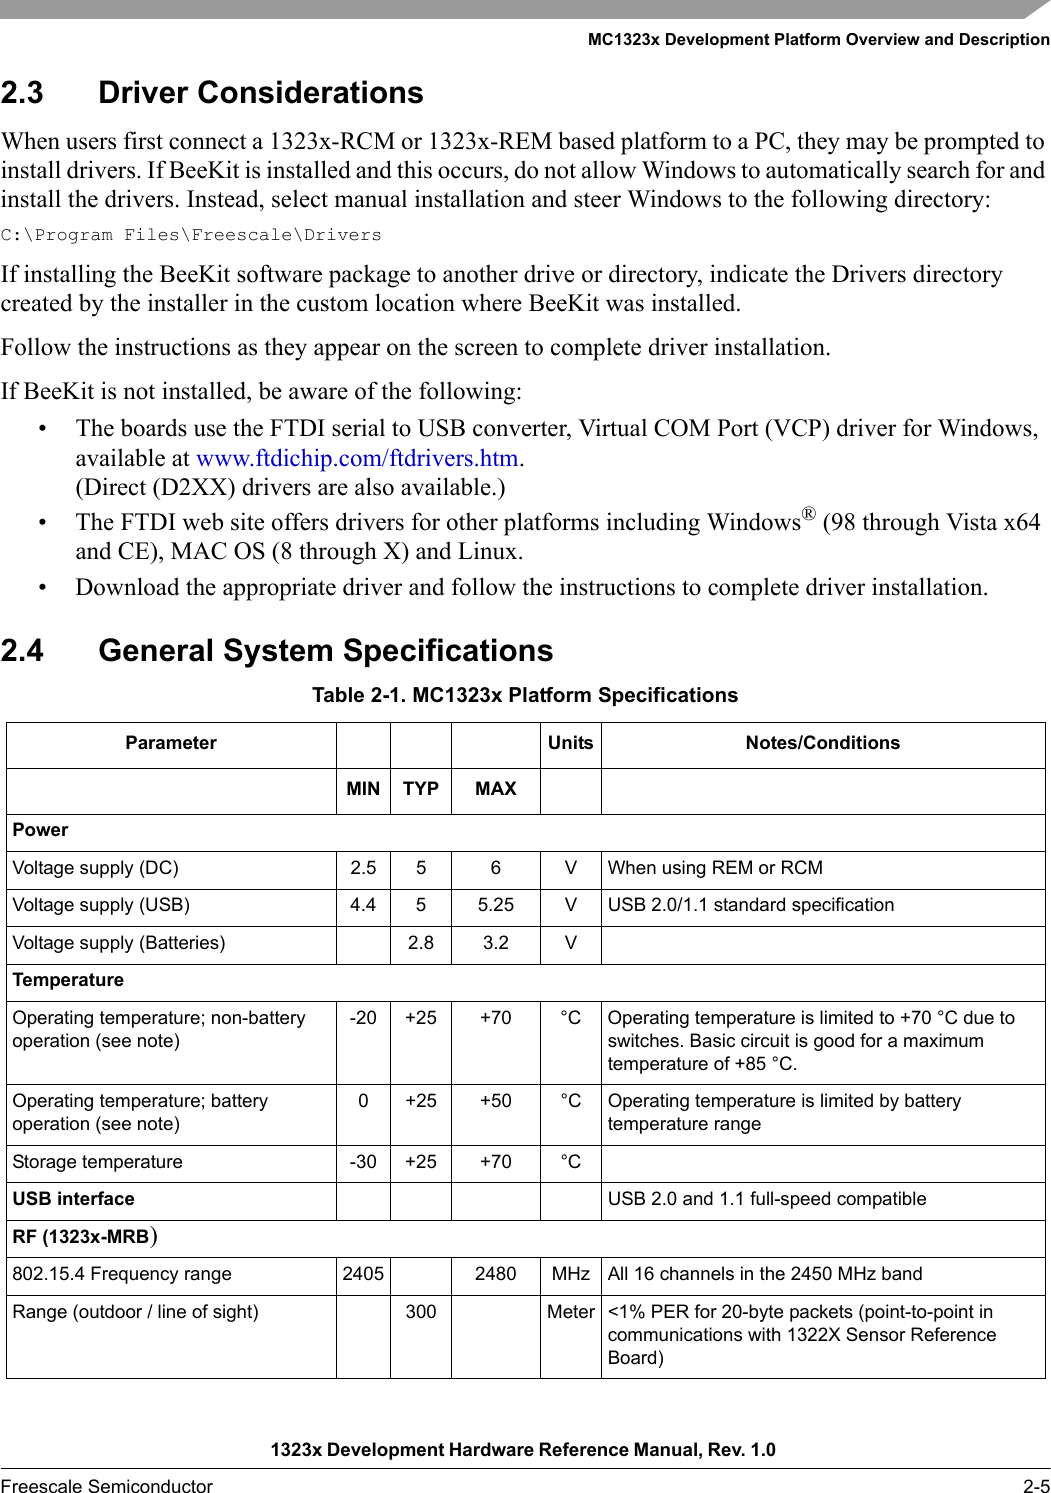 MC1323x Development Platform Overview and Description1323x Development Hardware Reference Manual, Rev. 1.0 Freescale Semiconductor 2-52.3 Driver ConsiderationsWhen users first connect a 1323x-RCM or 1323x-REM based platform to a PC, they may be prompted to install drivers. If BeeKit is installed and this occurs, do not allow Windows to automatically search for and install the drivers. Instead, select manual installation and steer Windows to the following directory:C:\Program Files\Freescale\DriversIf installing the BeeKit software package to another drive or directory, indicate the Drivers directory created by the installer in the custom location where BeeKit was installed.Follow the instructions as they appear on the screen to complete driver installation.If BeeKit is not installed, be aware of the following:• The boards use the FTDI serial to USB converter, Virtual COM Port (VCP) driver for Windows, available at www.ftdichip.com/ftdrivers.htm. (Direct (D2XX) drivers are also available.)• The FTDI web site offers drivers for other platforms including Windows® (98 through Vista x64 and CE), MAC OS (8 through X) and Linux.• Download the appropriate driver and follow the instructions to complete driver installation.2.4 General System SpecificationsTable 2-1. MC1323x Platform SpecificationsParameter Units Notes/ConditionsMIN TYP MAXPowerVoltage supply (DC) 2.5 5 6 V When using REM or RCMVoltage supply (USB) 4.4 5 5.25 V USB 2.0/1.1 standard specificationVoltage supply (Batteries) 2.8 3.2 VTemperatureOperating temperature; non-battery operation (see note)-20 +25 +70 °C Operating temperature is limited to +70 °C due to switches. Basic circuit is good for a maximum temperature of +85 °C.Operating temperature; battery operation (see note)0 +25 +50 °C Operating temperature is limited by battery temperature rangeStorage temperature -30 +25 +70 °CUSB interface USB 2.0 and 1.1 full-speed compatibleRF (1323x-MRB)802.15.4 Frequency range 2405 2480 MHz All 16 channels in the 2450 MHz bandRange (outdoor / line of sight) 300 Meter &lt;1% PER for 20-byte packets (point-to-point in communications with 1322X Sensor Reference Board)